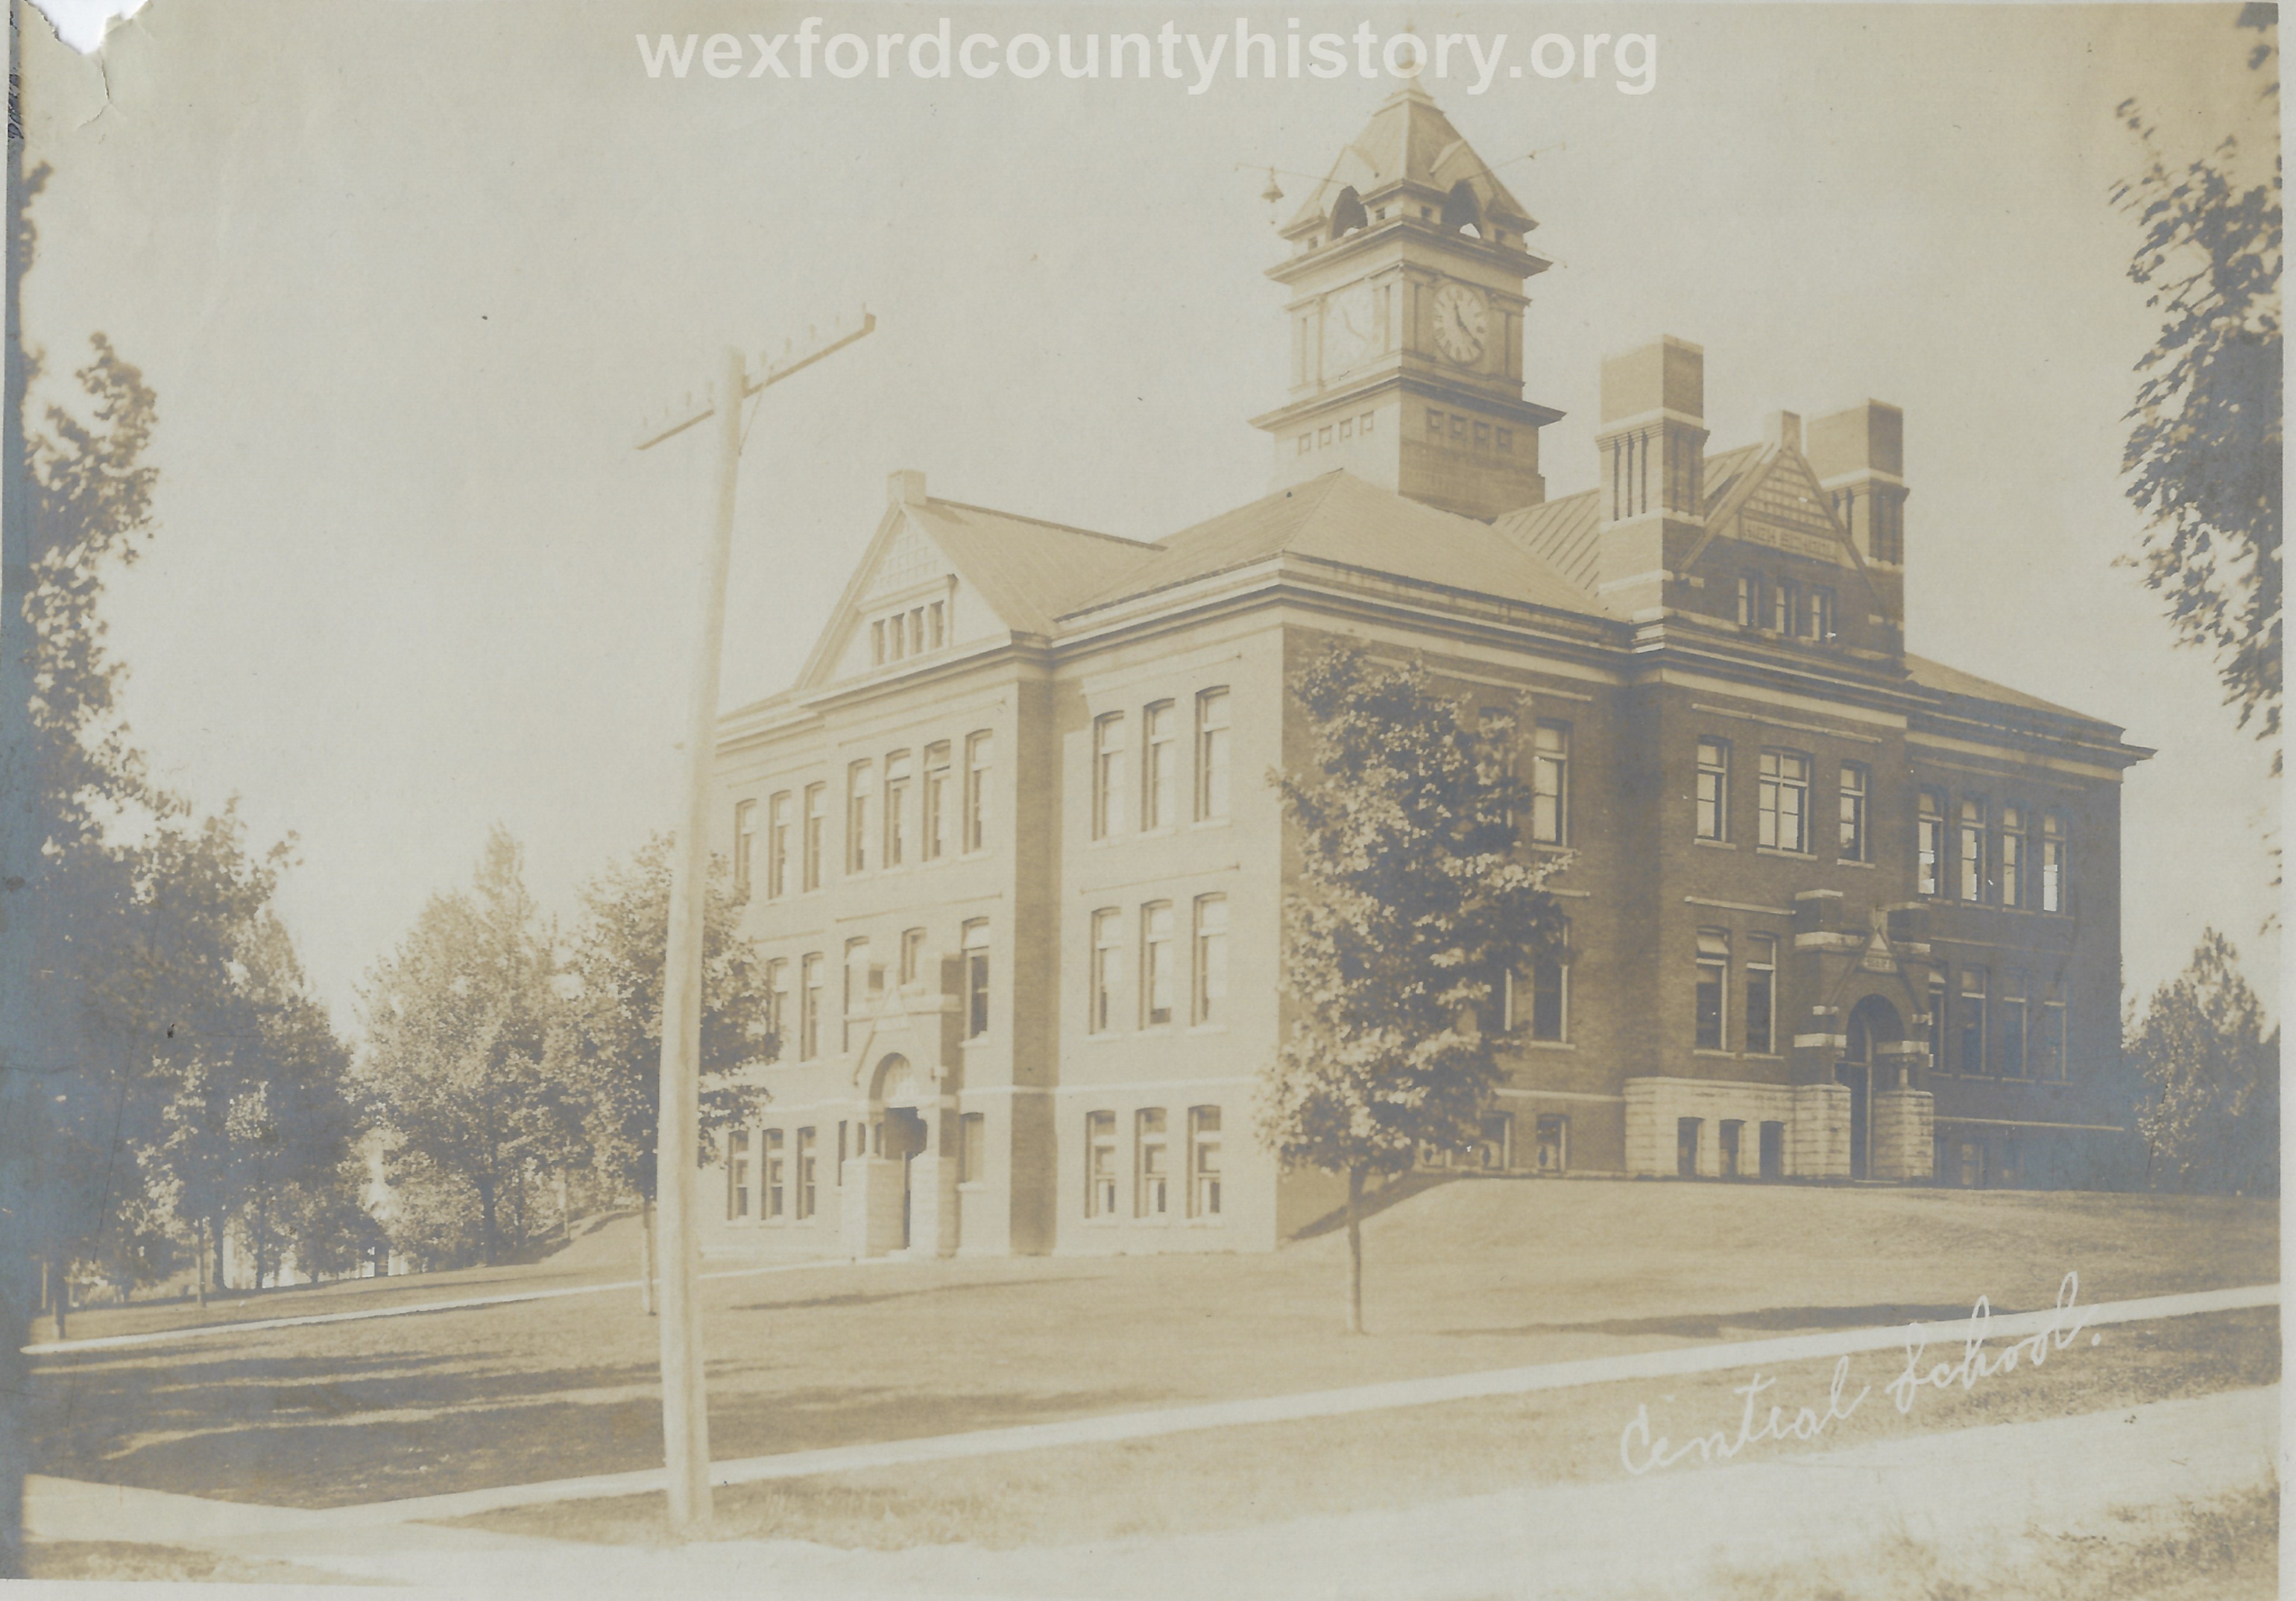 The First Brick Central High School (1890 - 1911)